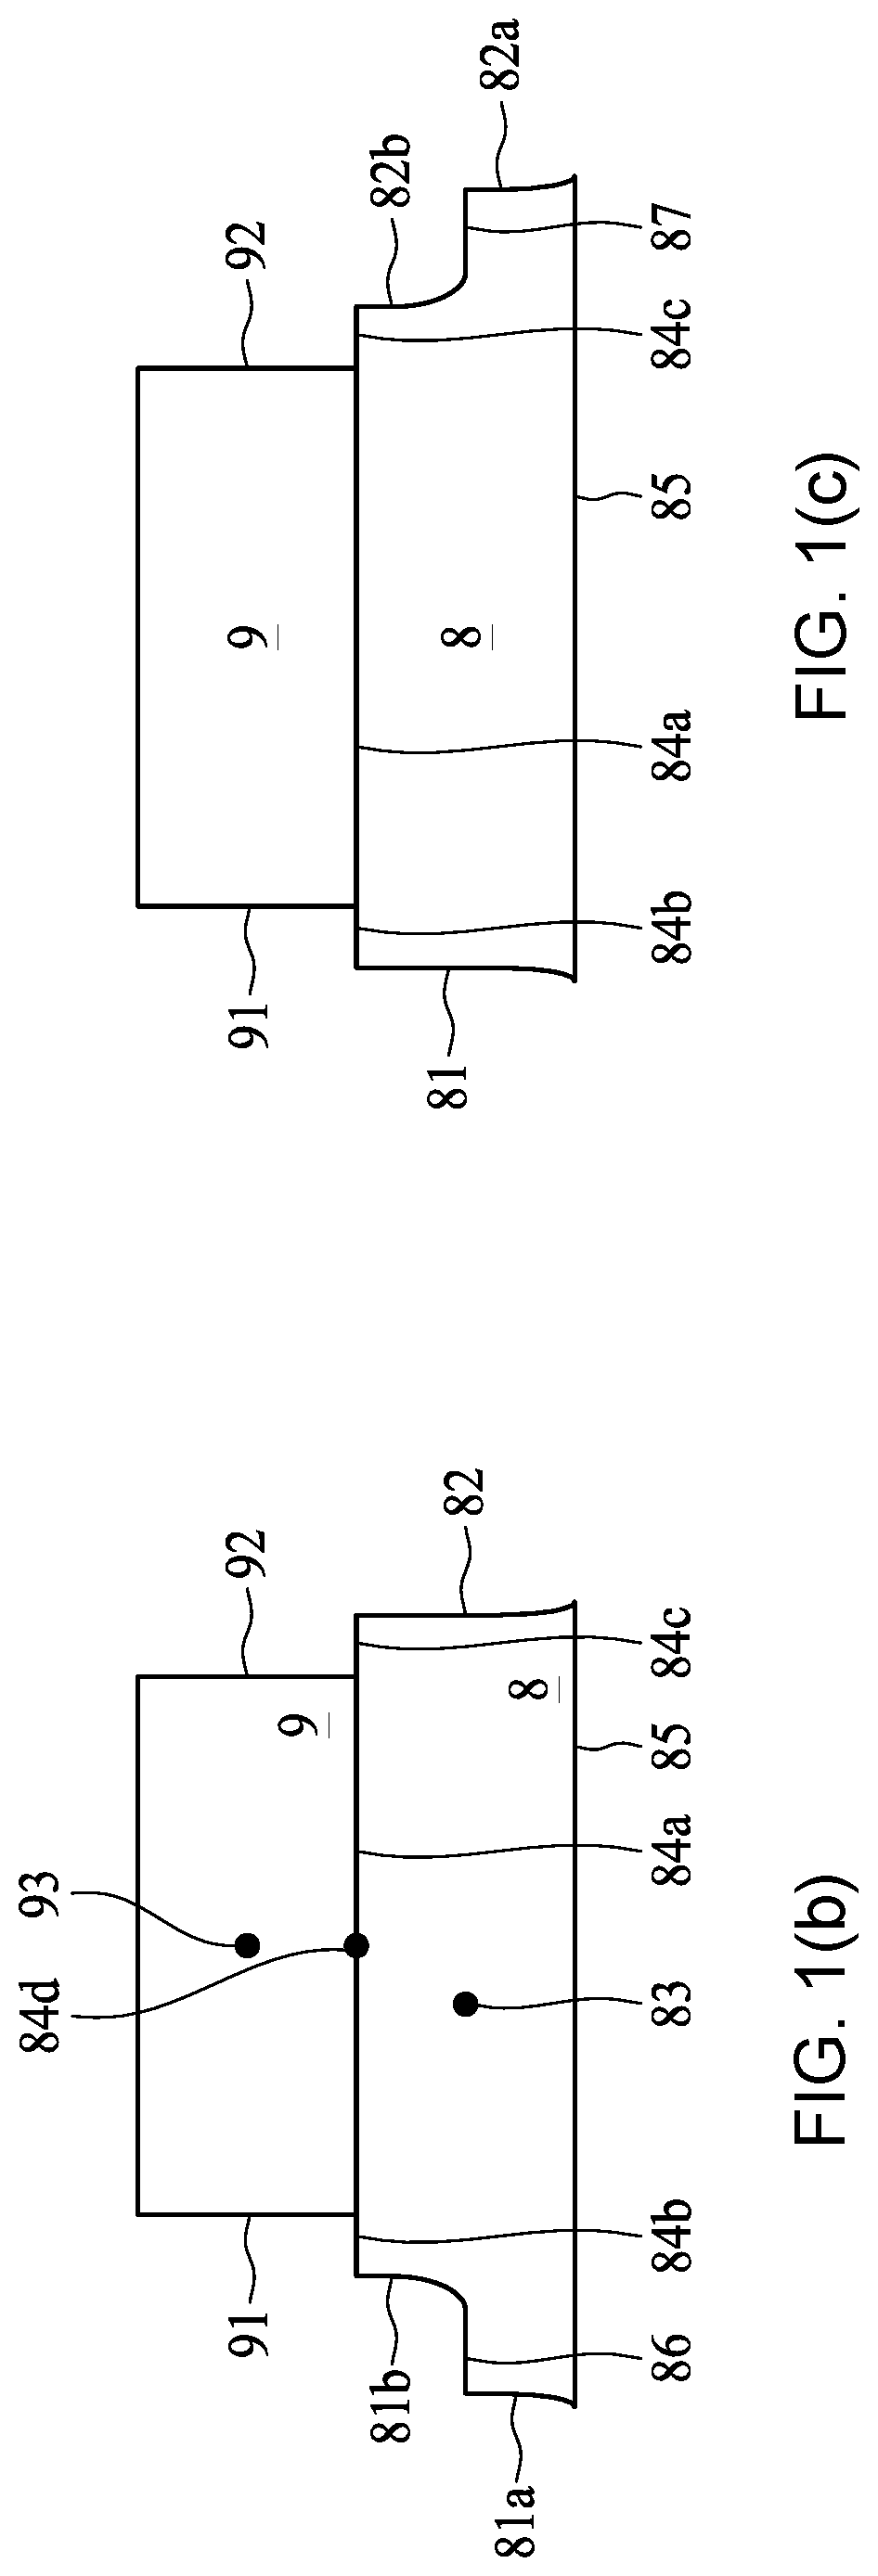 Semiconductor device having improved gate leakage current